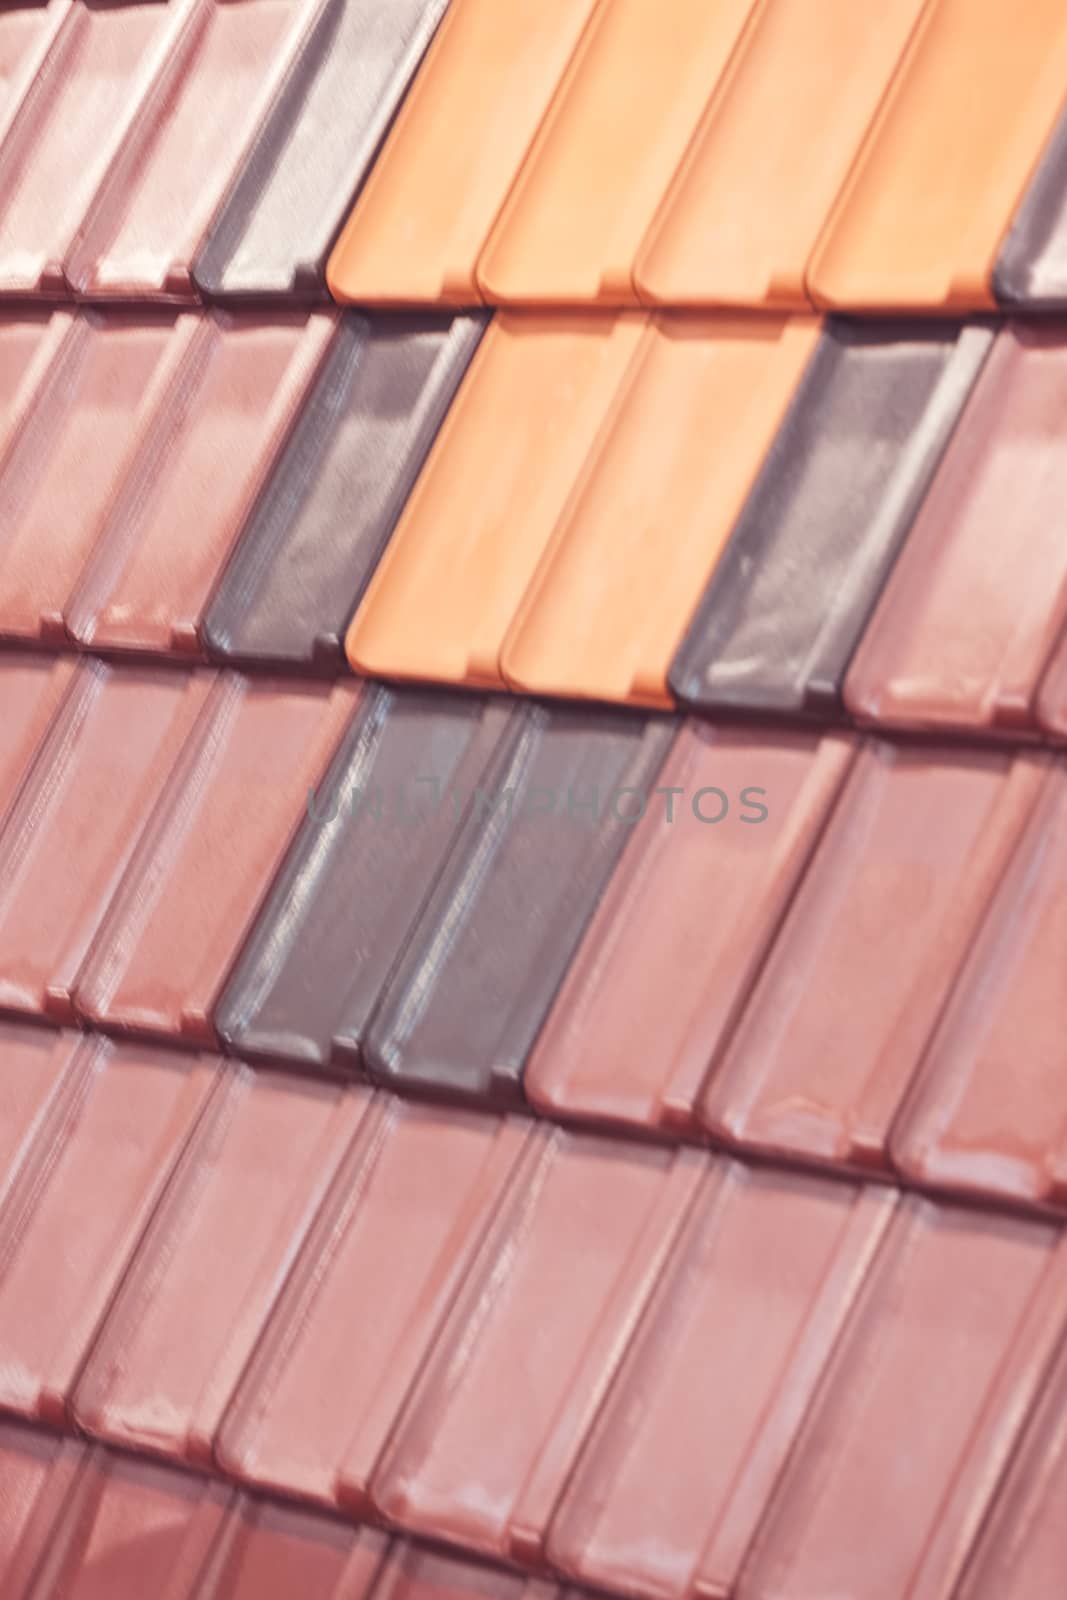 red roof tiles by vladimirnenezic